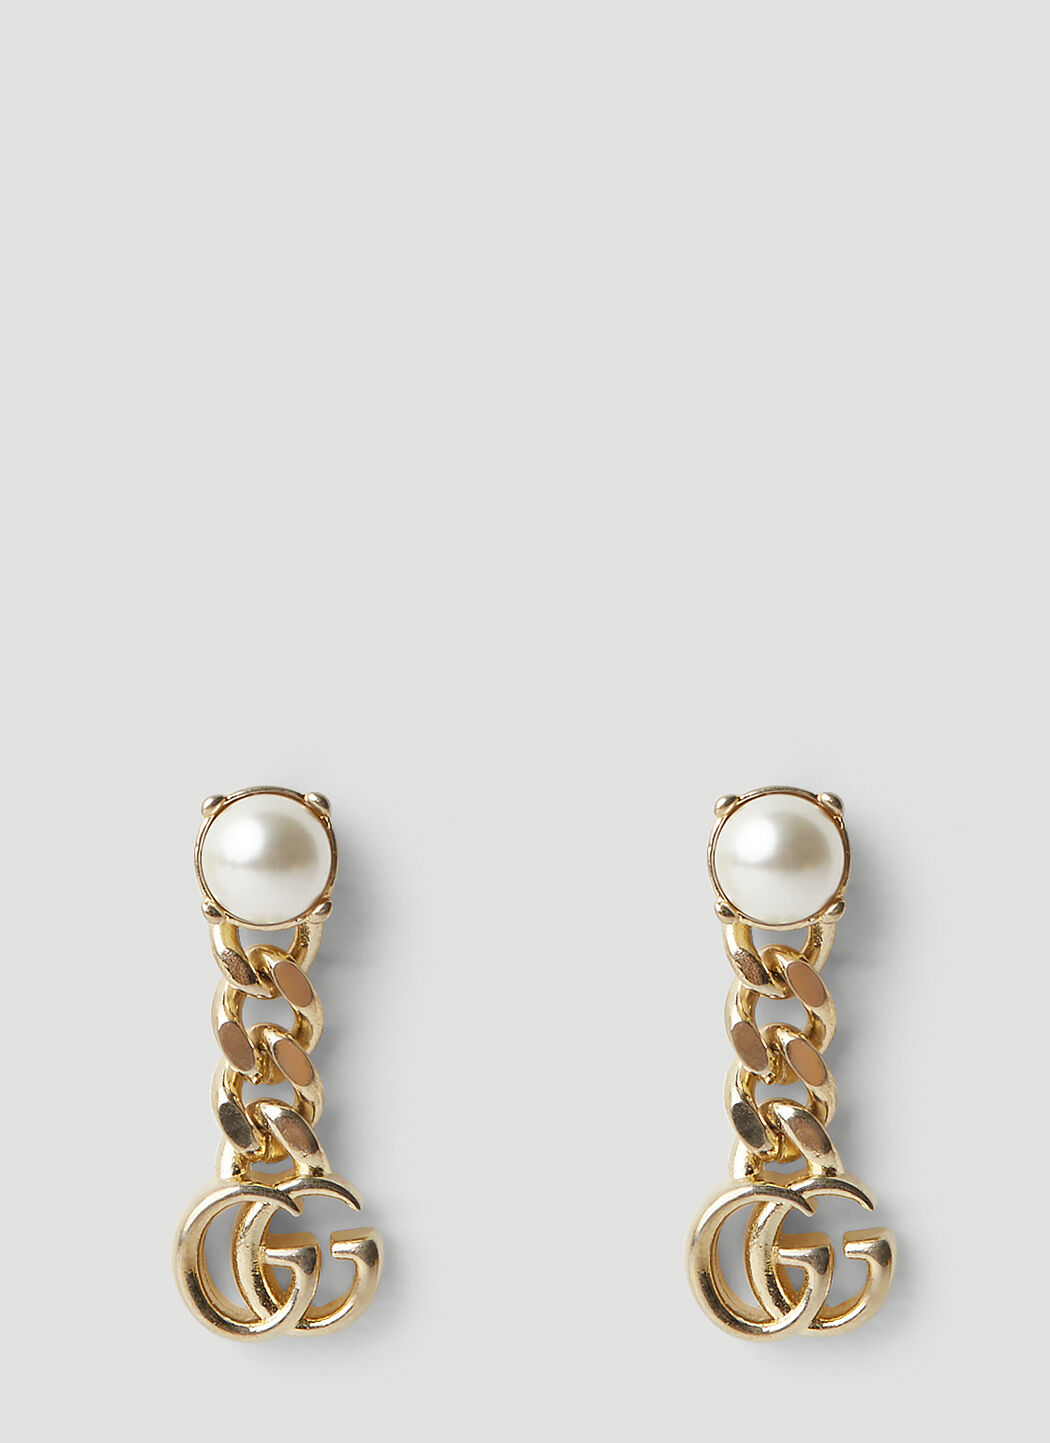 Gucci Link to Love Yellow Gold Threader Earrings | Neiman Marcus